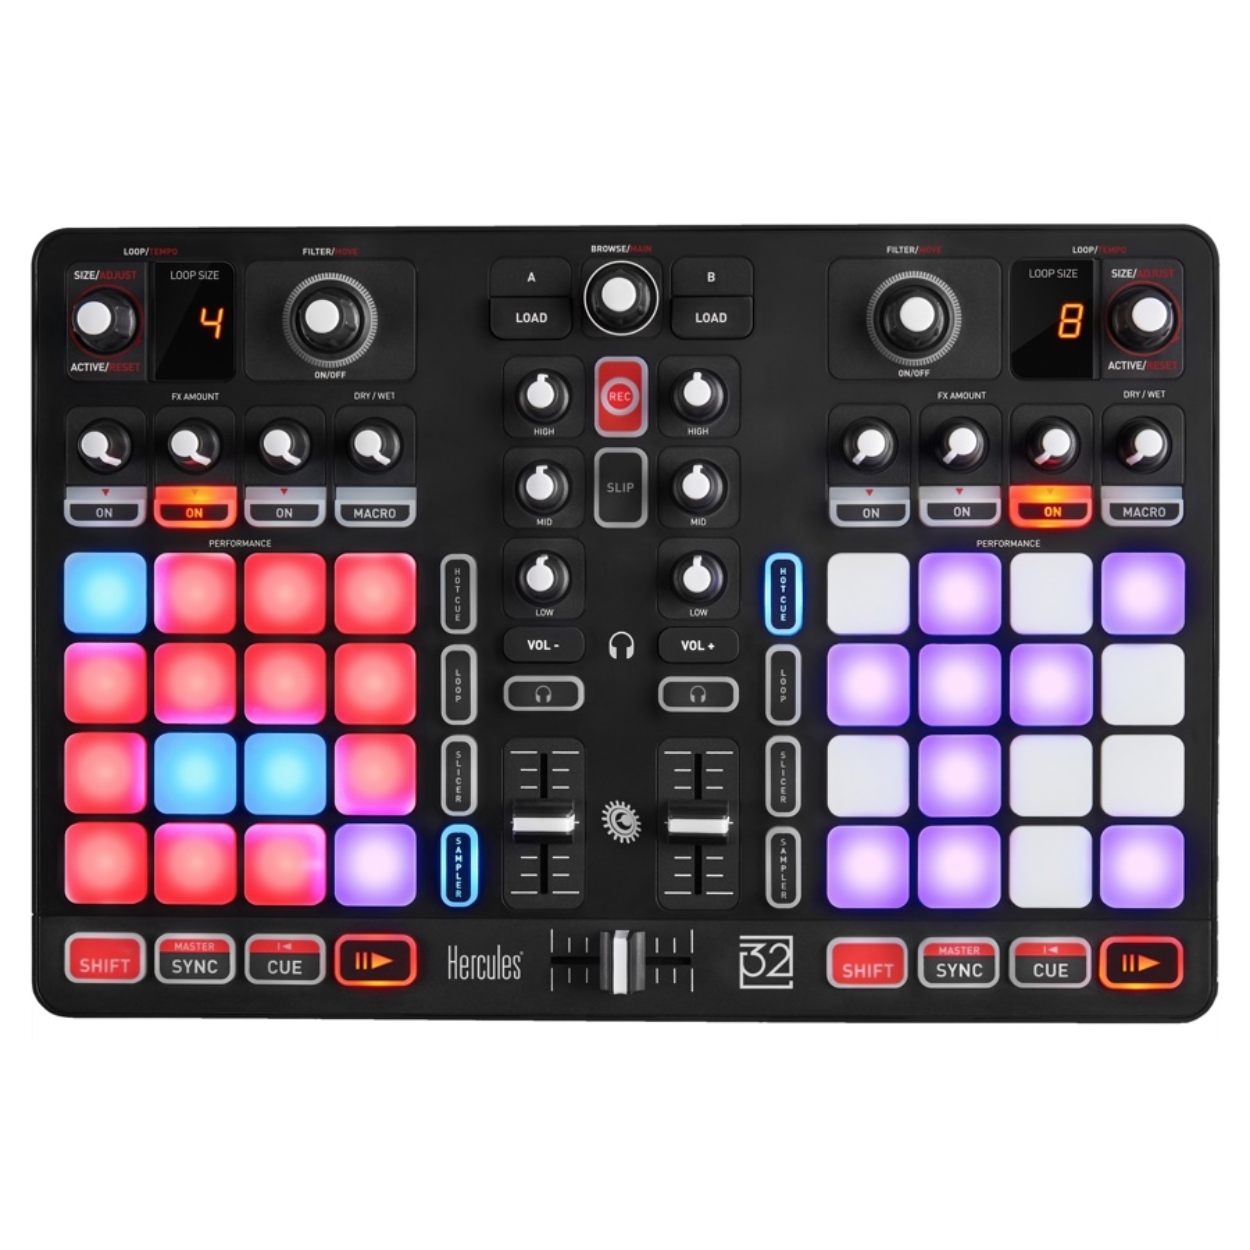 Hercules P32 DJ Compact USB DJ controller,32 high-performance touch pads, & Full DJ Software DJUCED included, Serato DJ Compatible